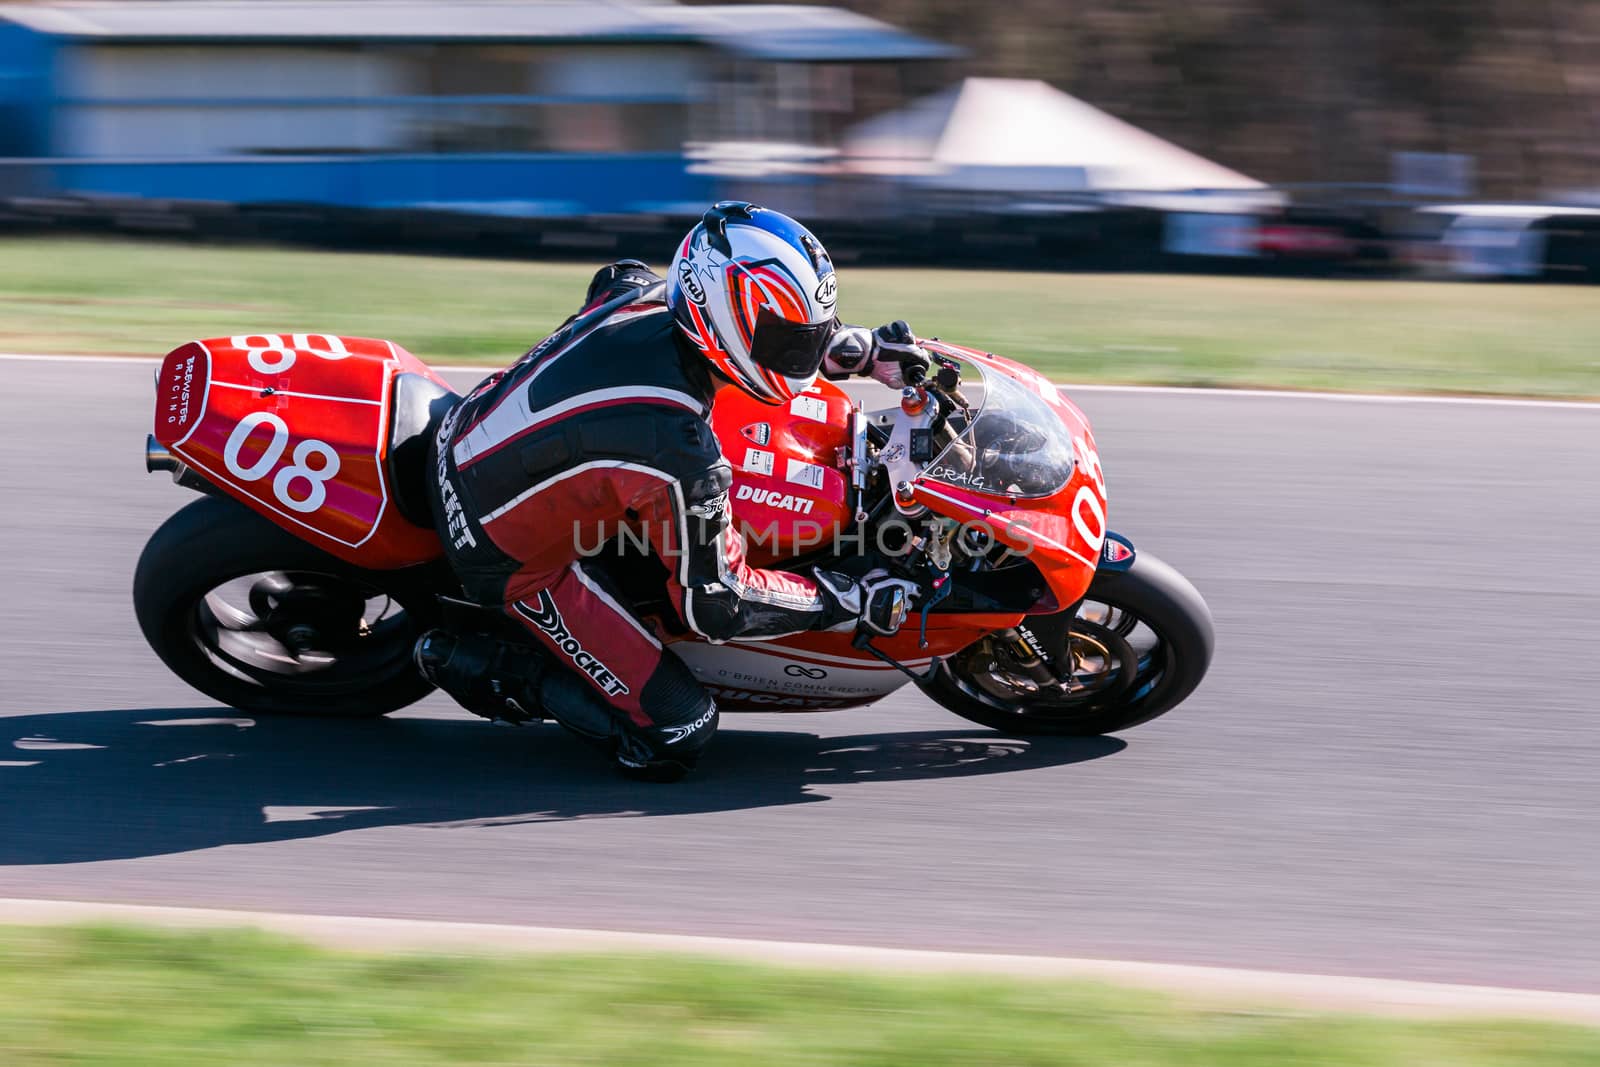 Hartwell Motorcycle Club Championship - Round 5 by davidhewison